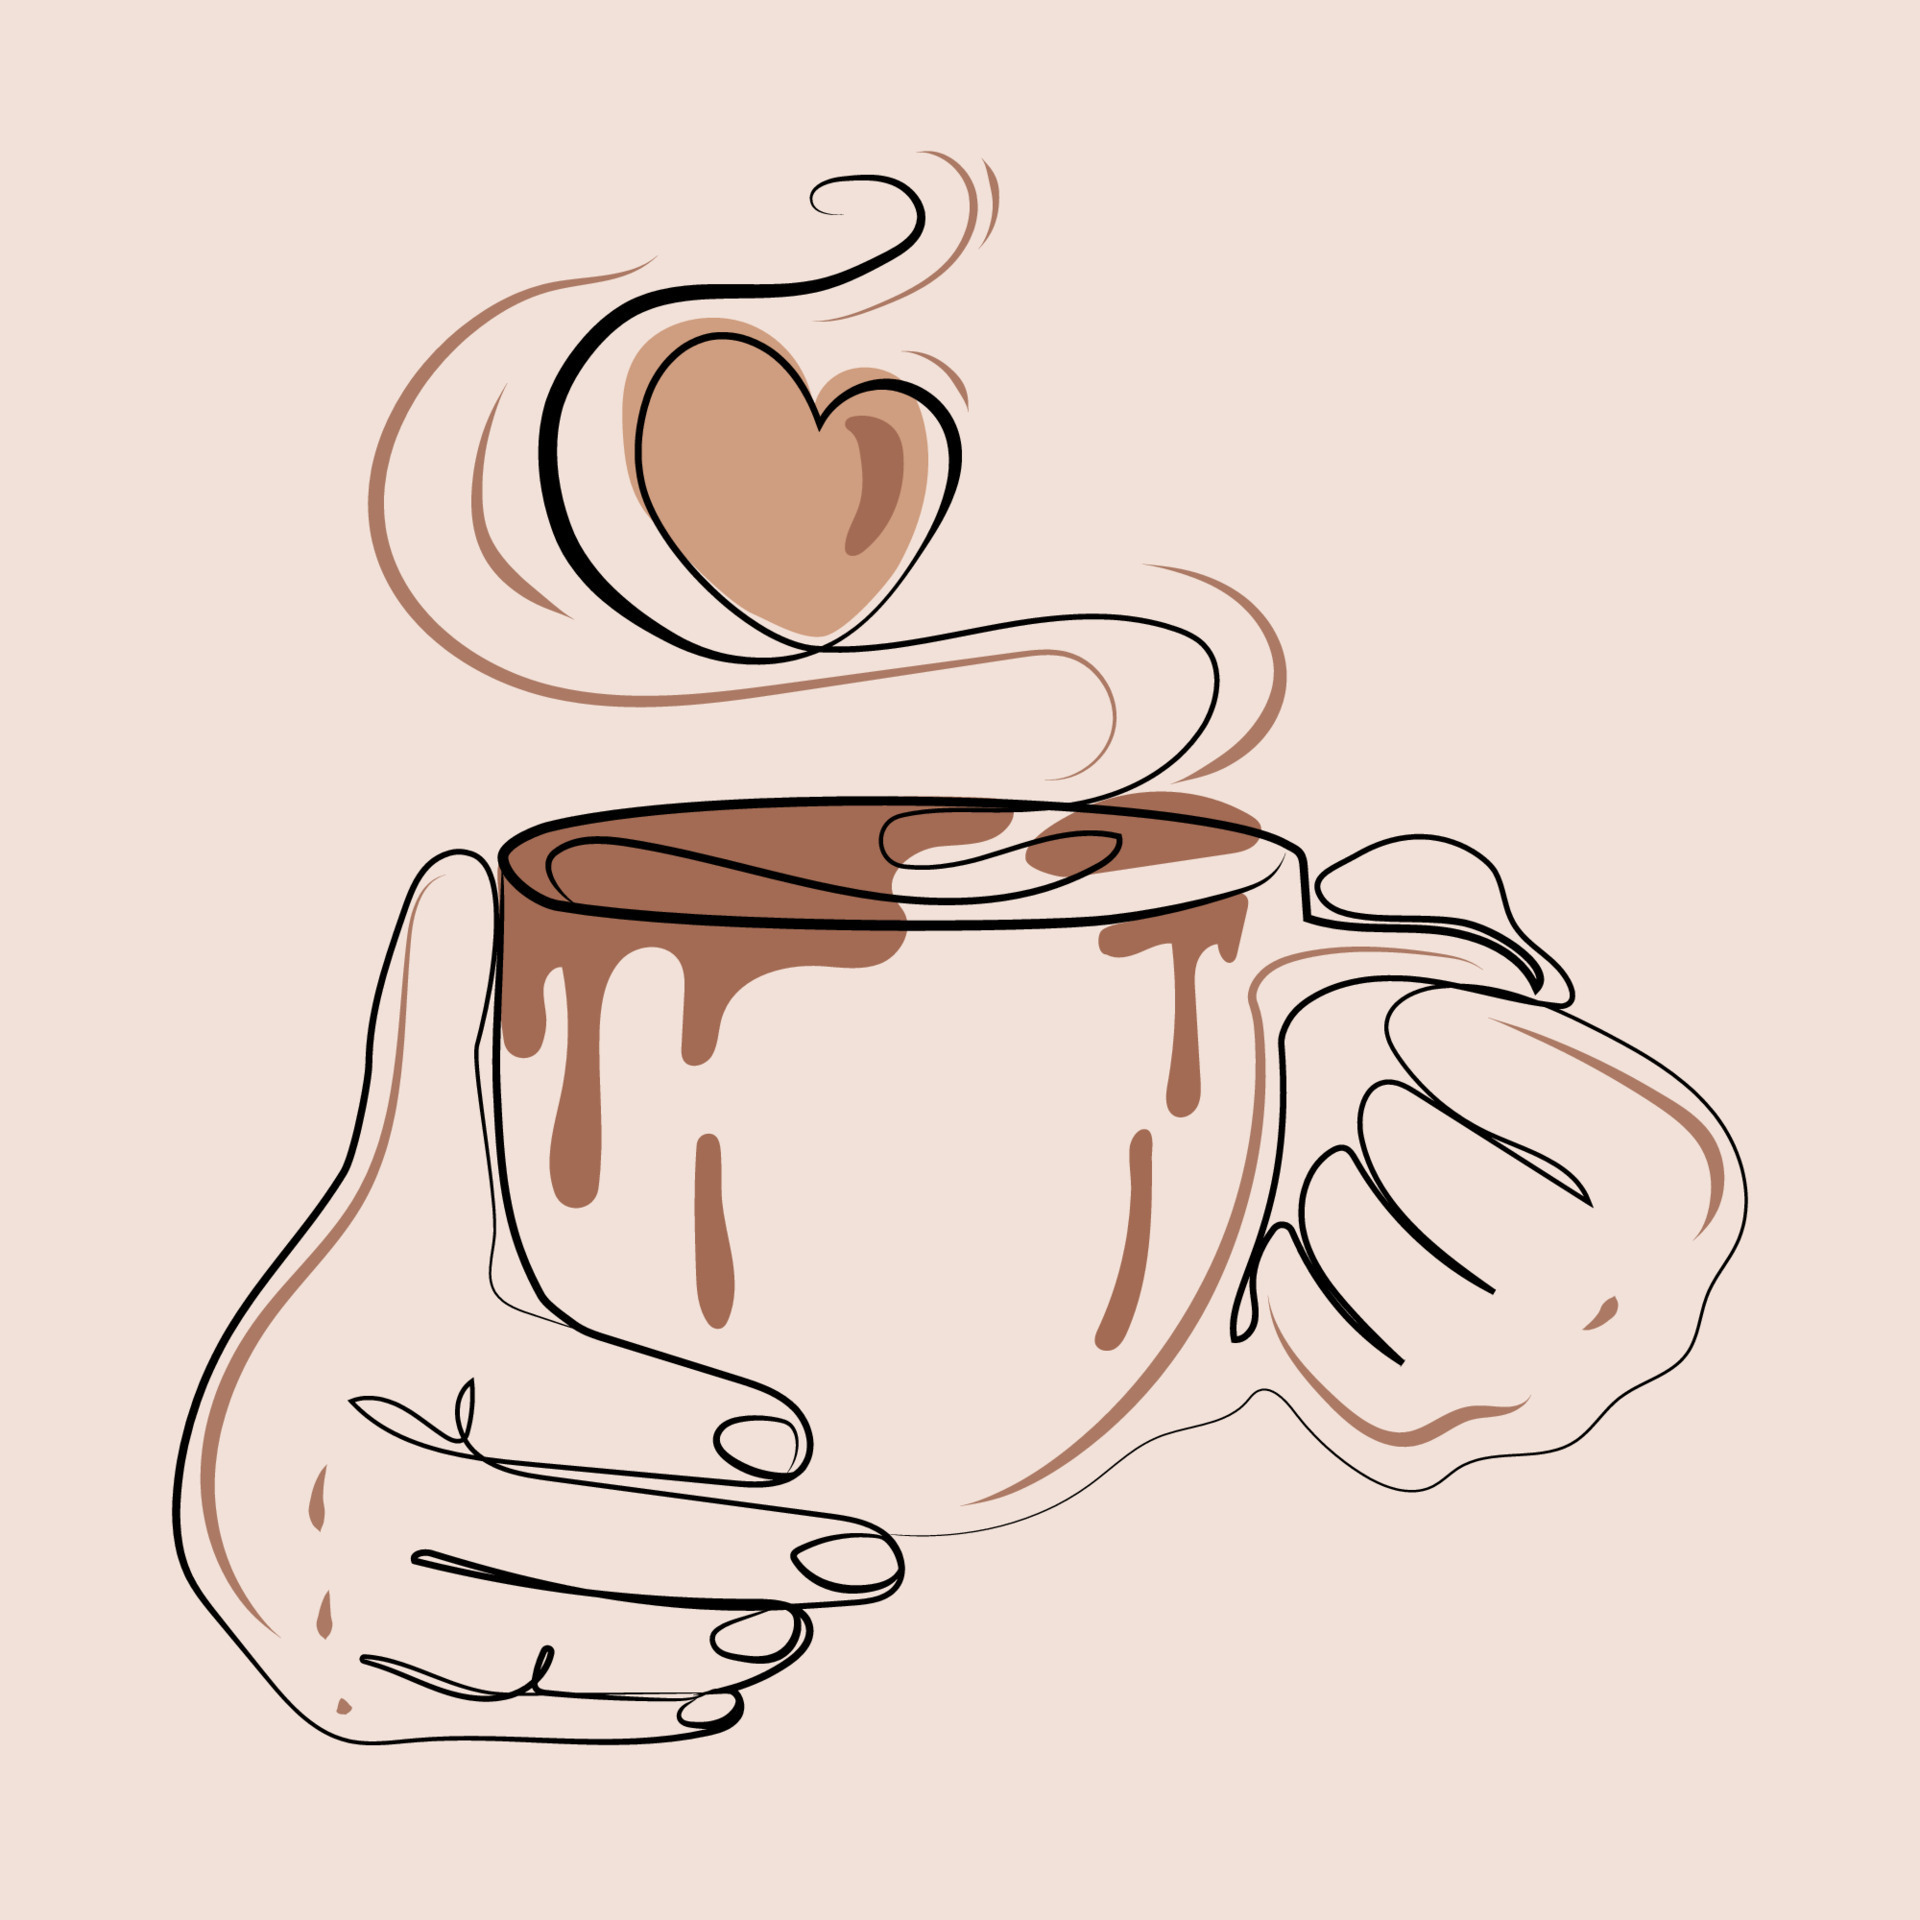 Two hands hold mug or cup of hot drink with heart shape  steam,poster,logo,emblem design,vector illustration.Abstract line drawing  of cup hot tea or coffee in hands modern illustration in simple style  12994964 Vector